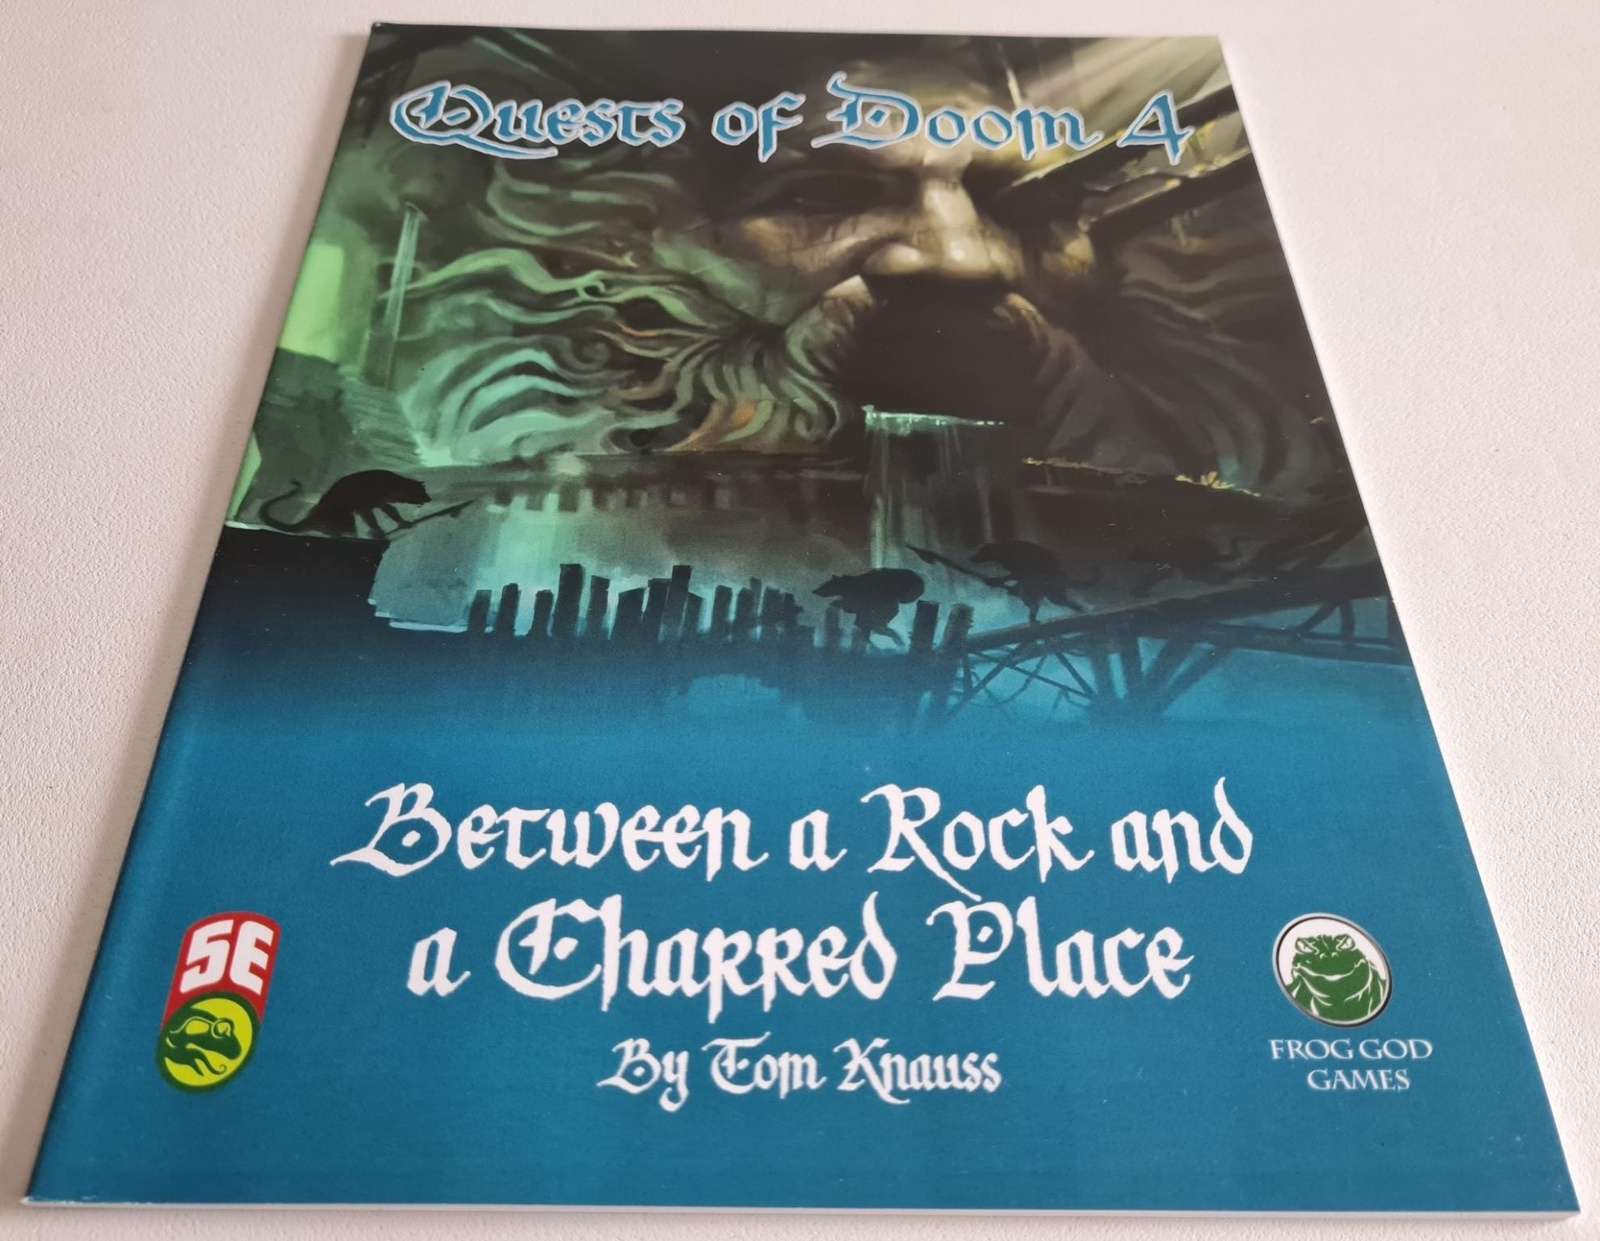 Quests of Doom 4: Between a Rock and a Charred Place - D&D 5th Edition (5e)